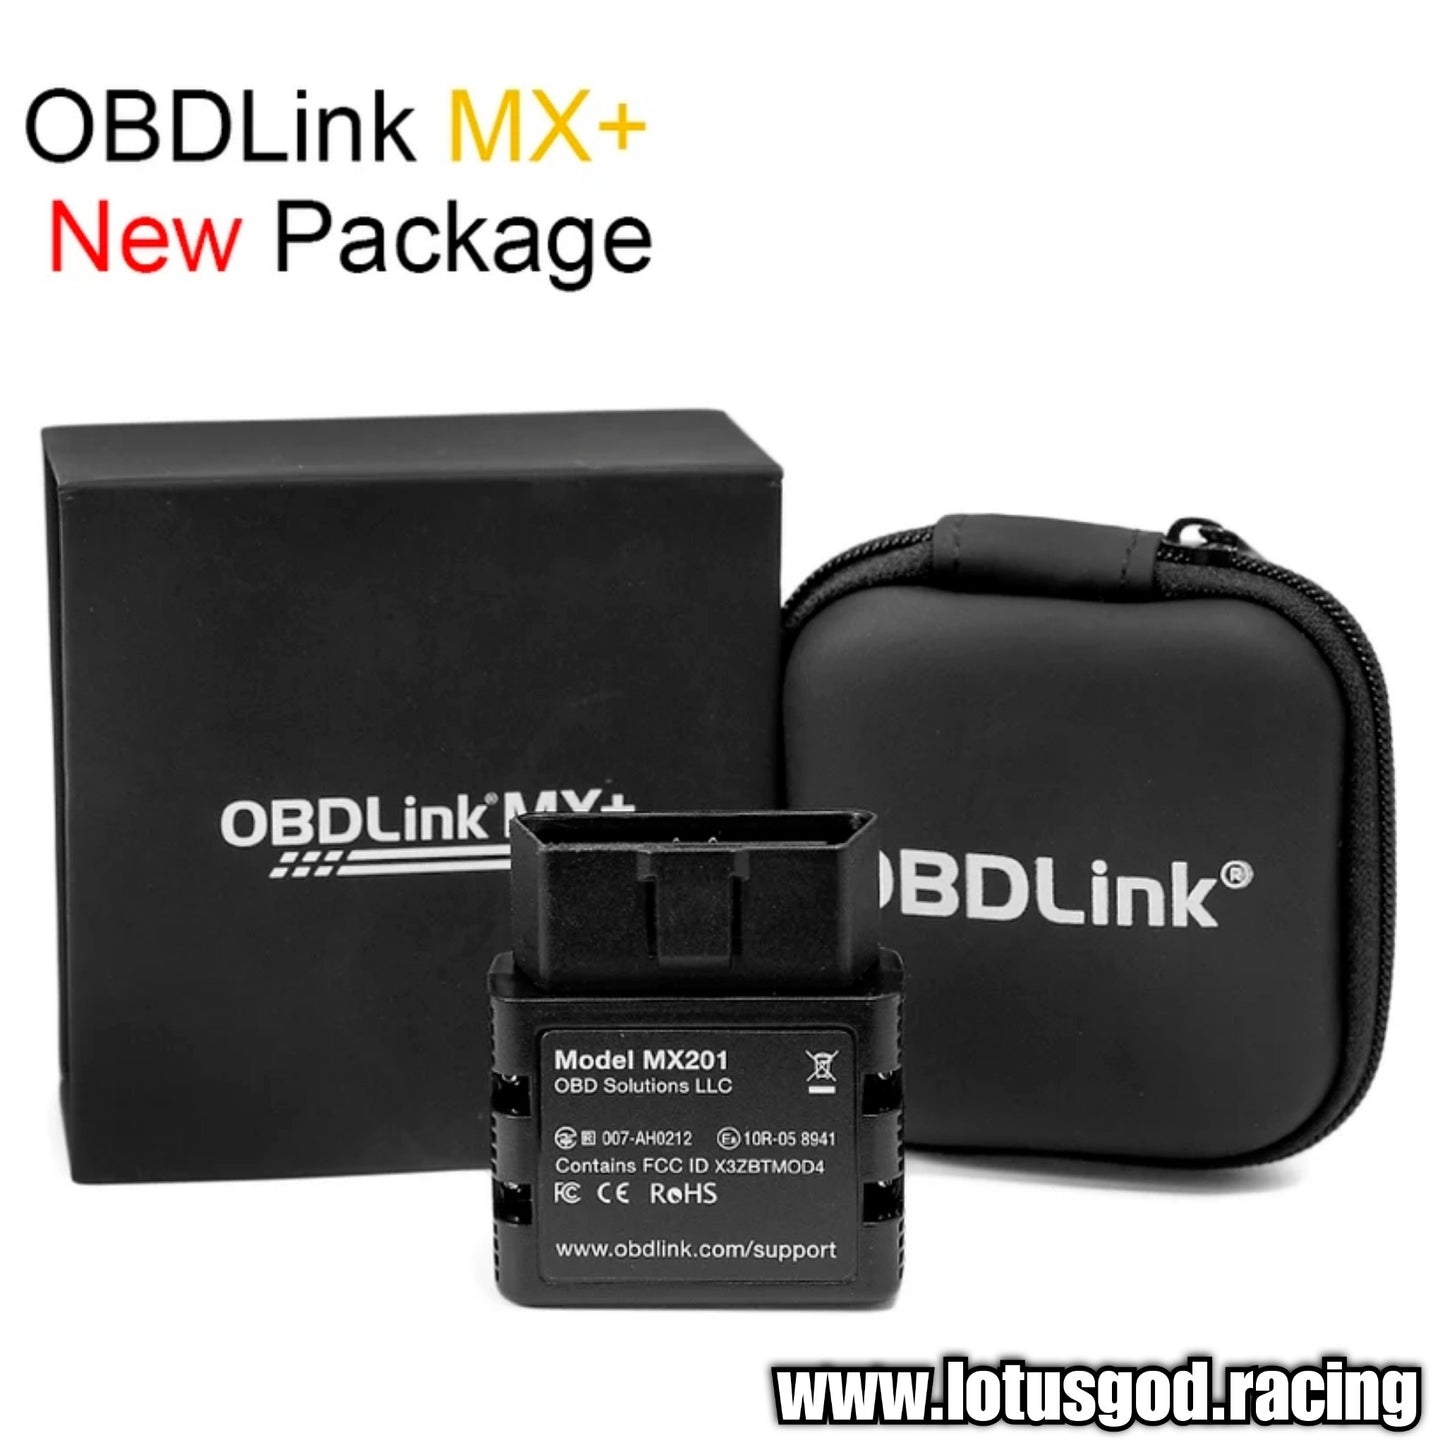 The Ultimate OBDLink MX + PLUS OBD2 Scanner Diagnostic Scan Wireless Bluetooth Obd Car Vehicle Tool for Apple iOS Android, Kindle Fire or Windows Device